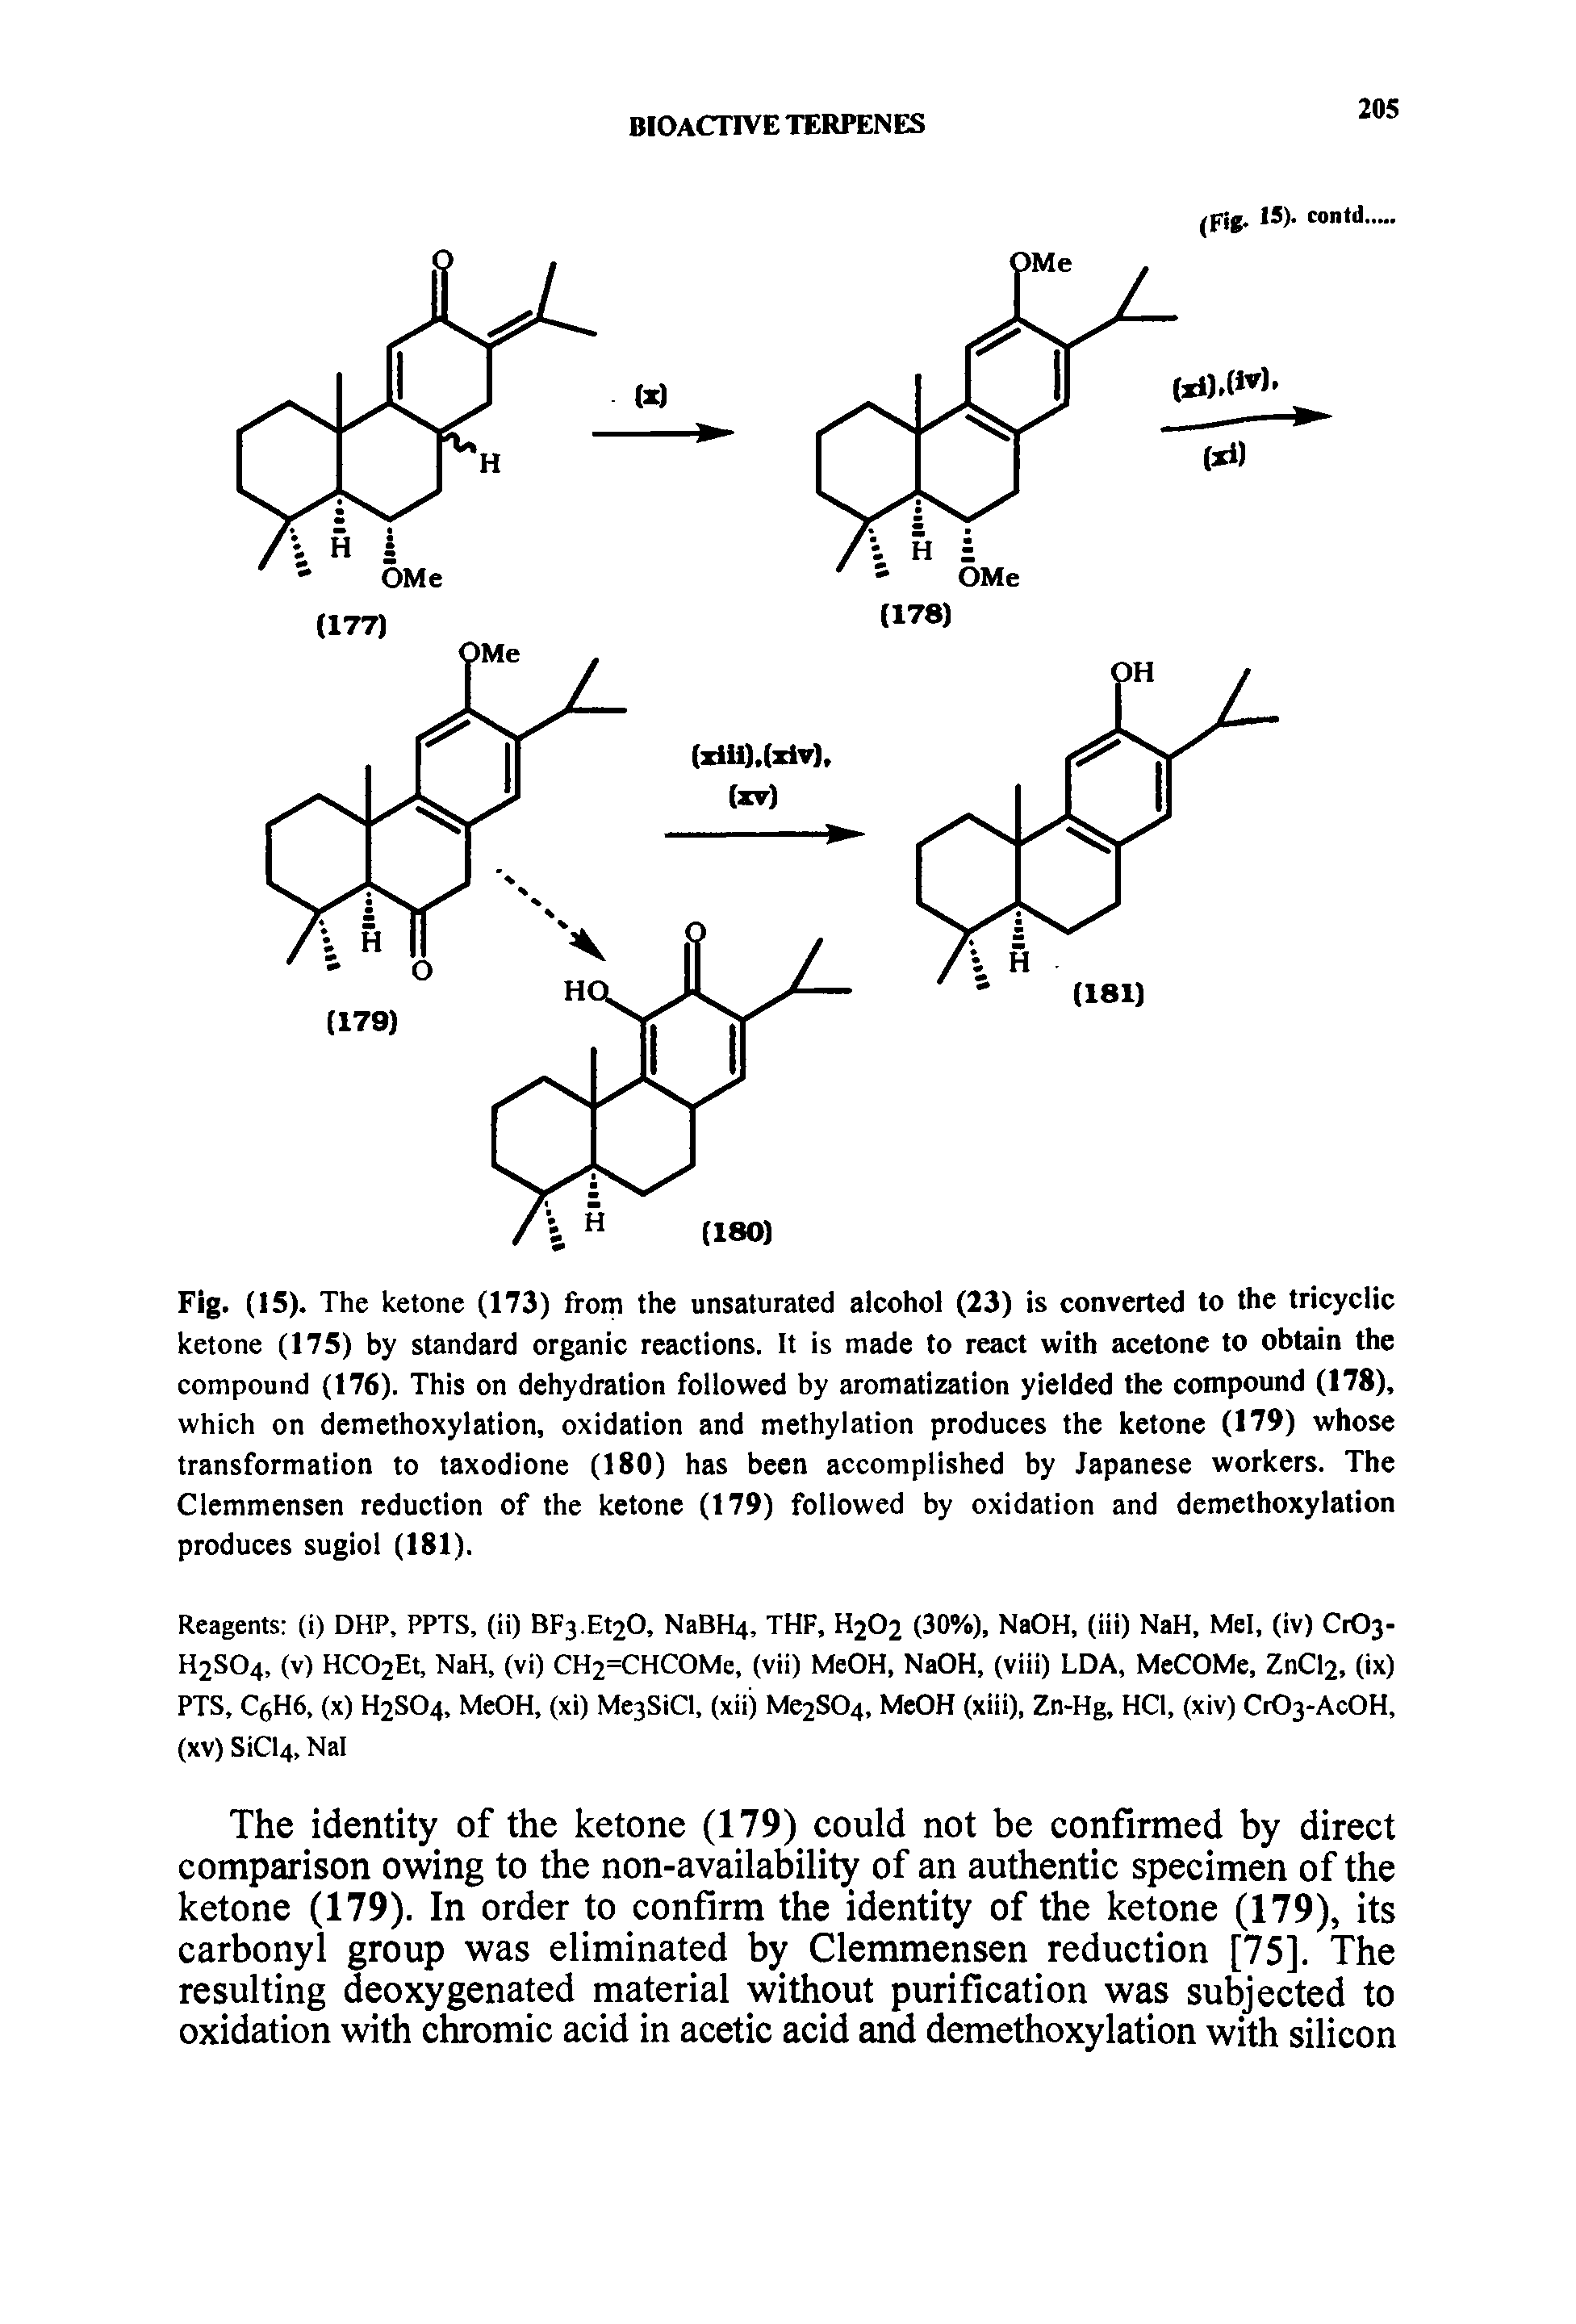 Fig. (15). The ketone (173) from the unsaturated alcohol (23) is converted to the tricyclic ketone (175) by standard organic reactions. It is made to react with acetone to obtain the compound (176). This on dehydration followed by aromatization yielded the compound (178), which on demethoxylation, oxidation and methylation produces the ketone (179) whose transformation to taxodione (180) has been accomplished by Japanese workers. The Clemmensen reduction of the ketone (179) followed by oxidation and demethoxylation produces sugiol (181).